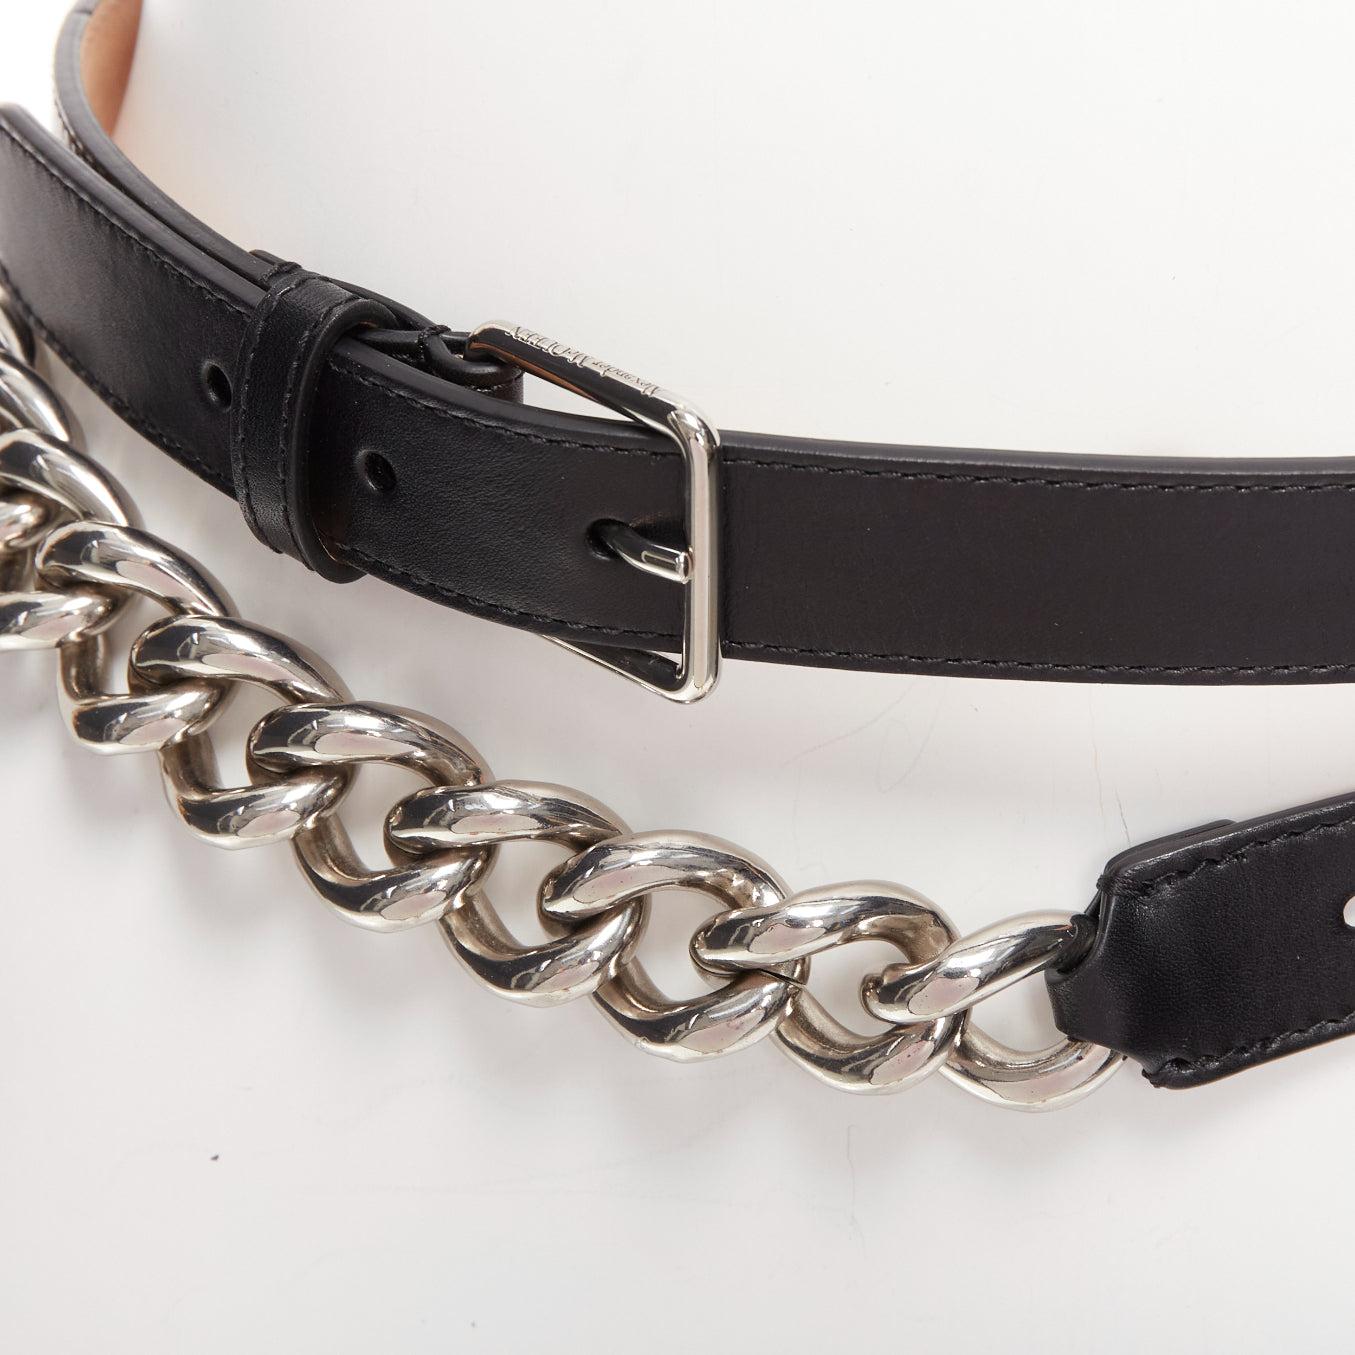 ALEXANDER MCQUEEN black leather silver chunky metal chain wrap belt 70cm
Reference: AAWC/A01197
Brand: Alexander McQueen
Designer: Sarah Burton
Material: Leather, Metal
Color: Black, Silver
Pattern: Solid
Closure: Belt
Lining: Nude Leather
Extra